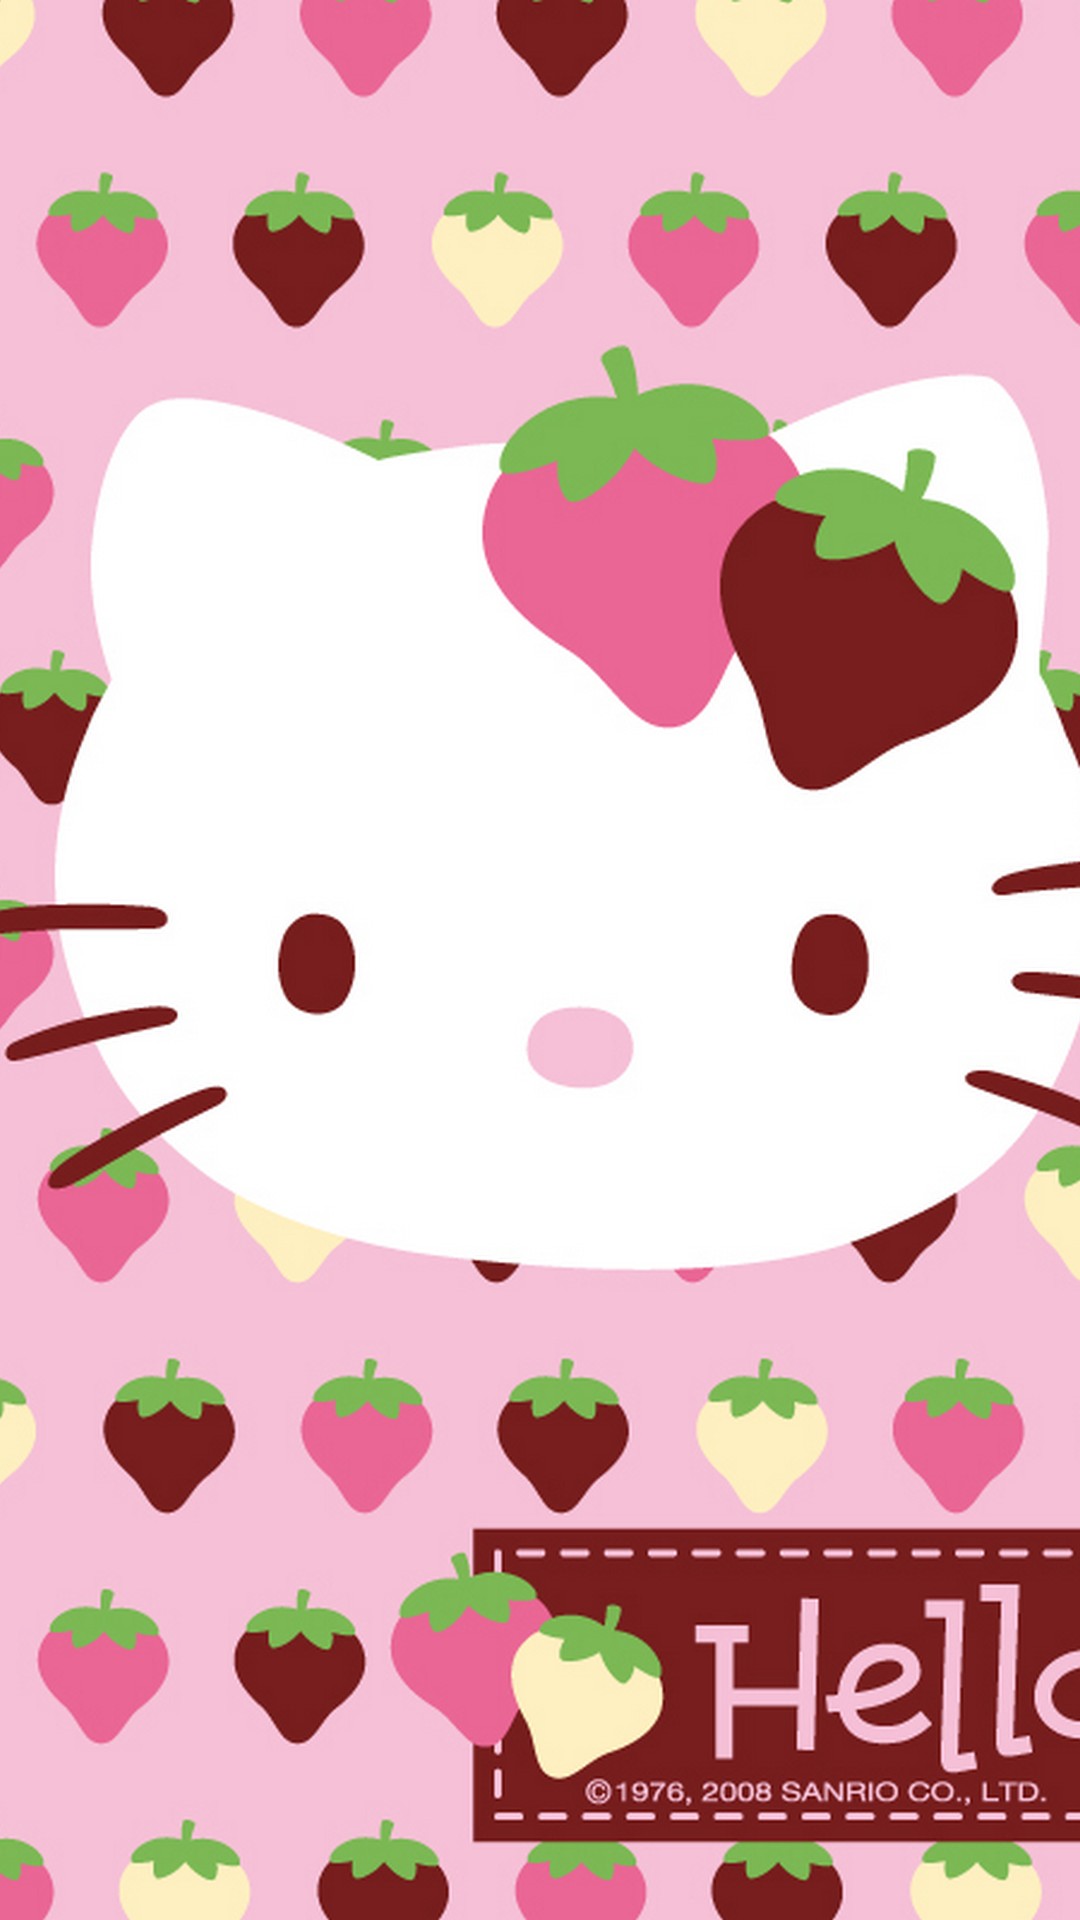 Wallpaper Hello Kitty Pictures Android with resolution 1080X1920 pixel. You can make this wallpaper for your Android backgrounds, Tablet, Smartphones Screensavers and Mobile Phone Lock Screen